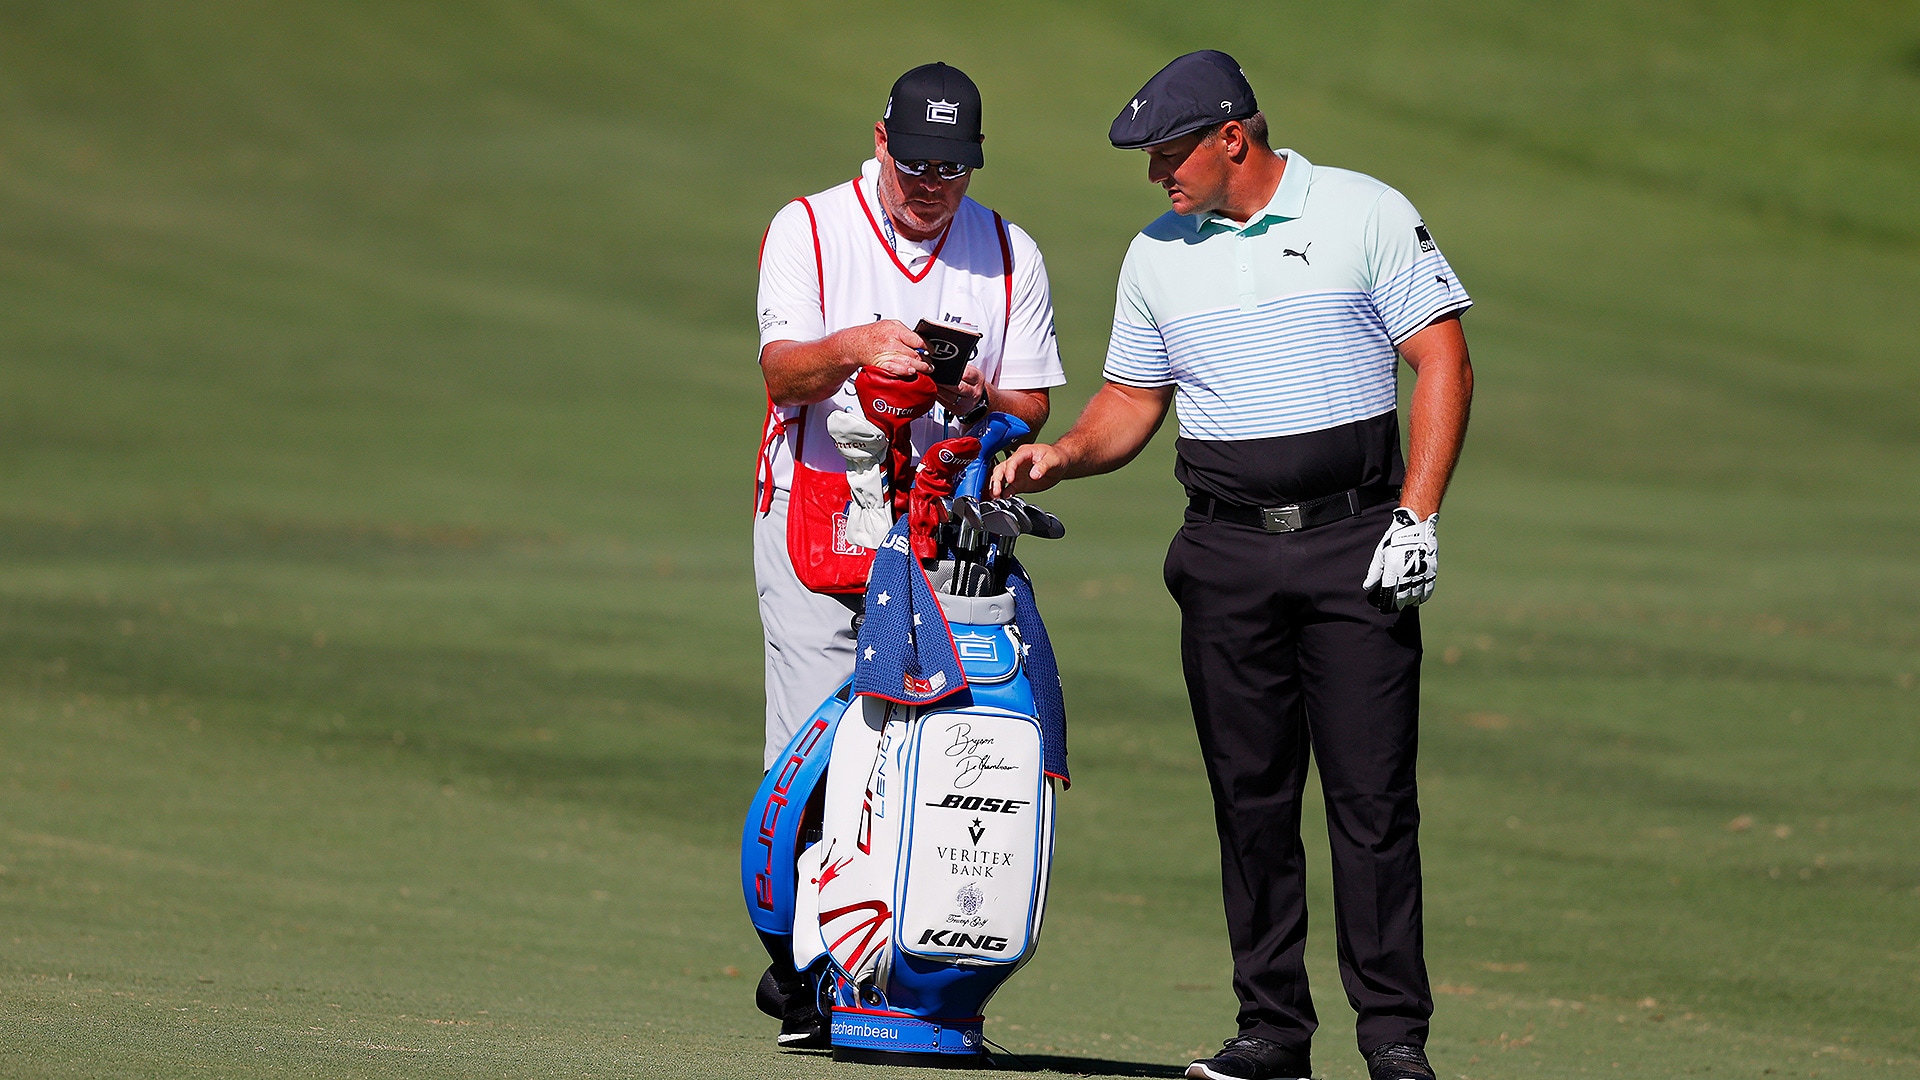 Players and caddies adapting – or not – to PGA Tour’s new safety rules